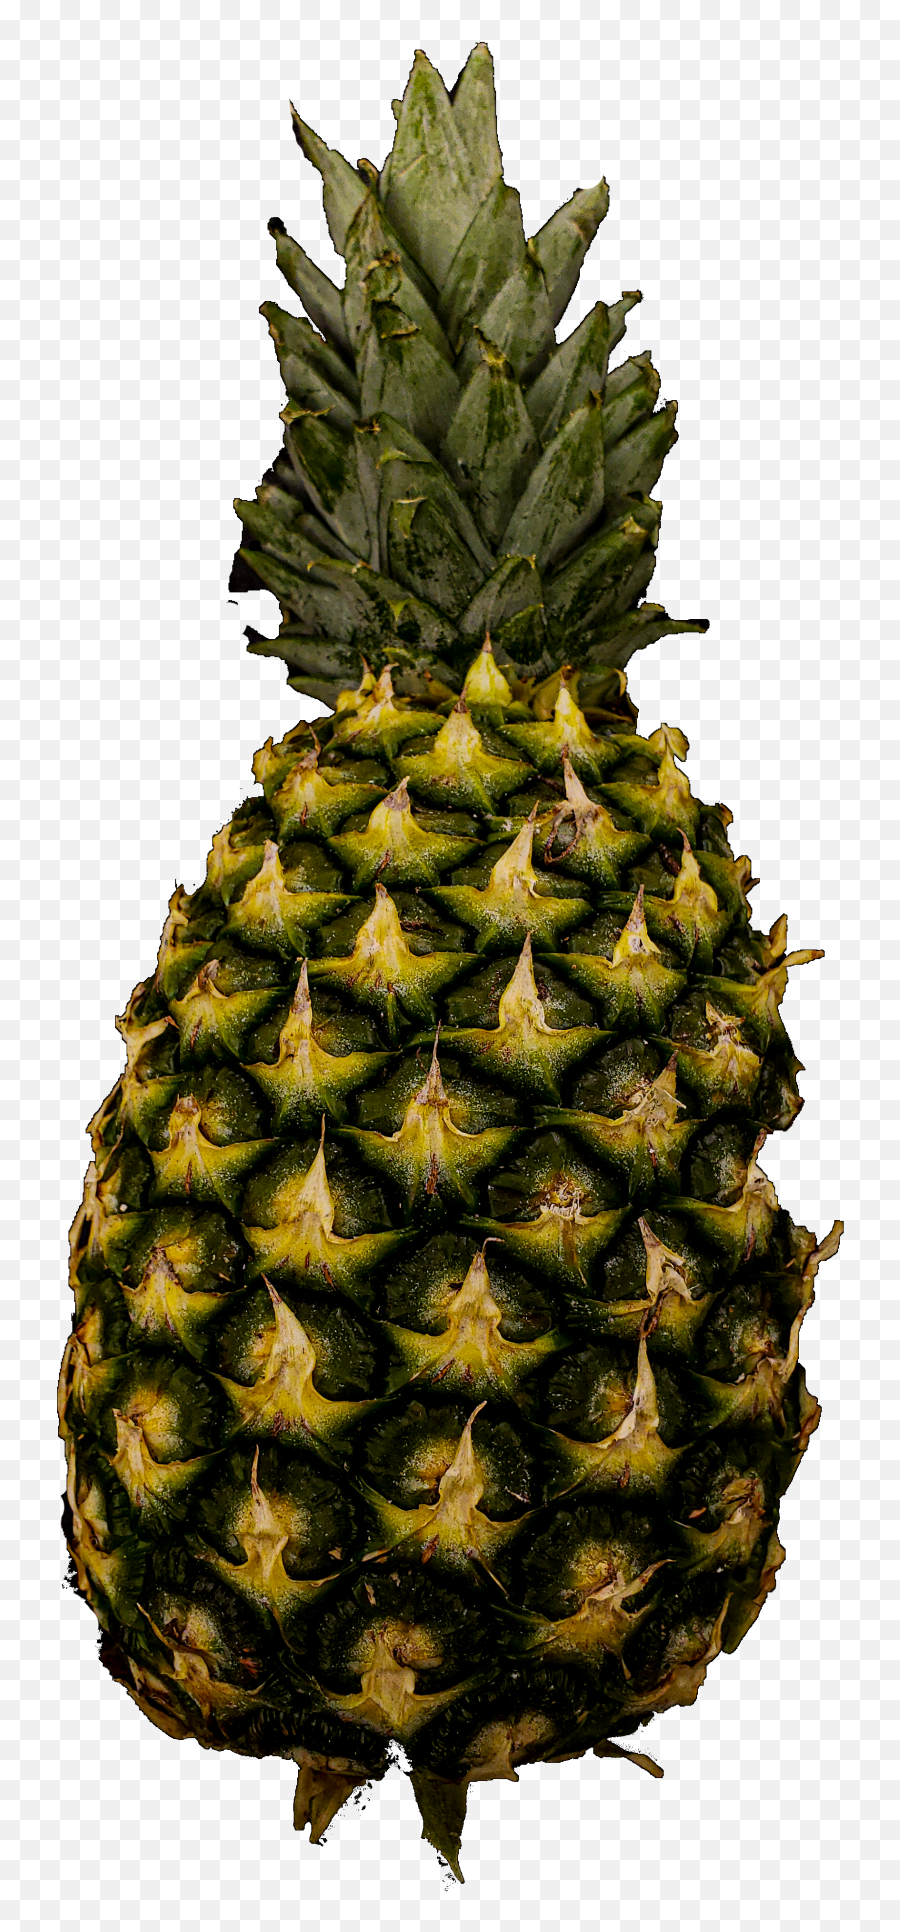 Pineapple - Public Domain Pictures Ananas Png,Pineapple Transparent Background